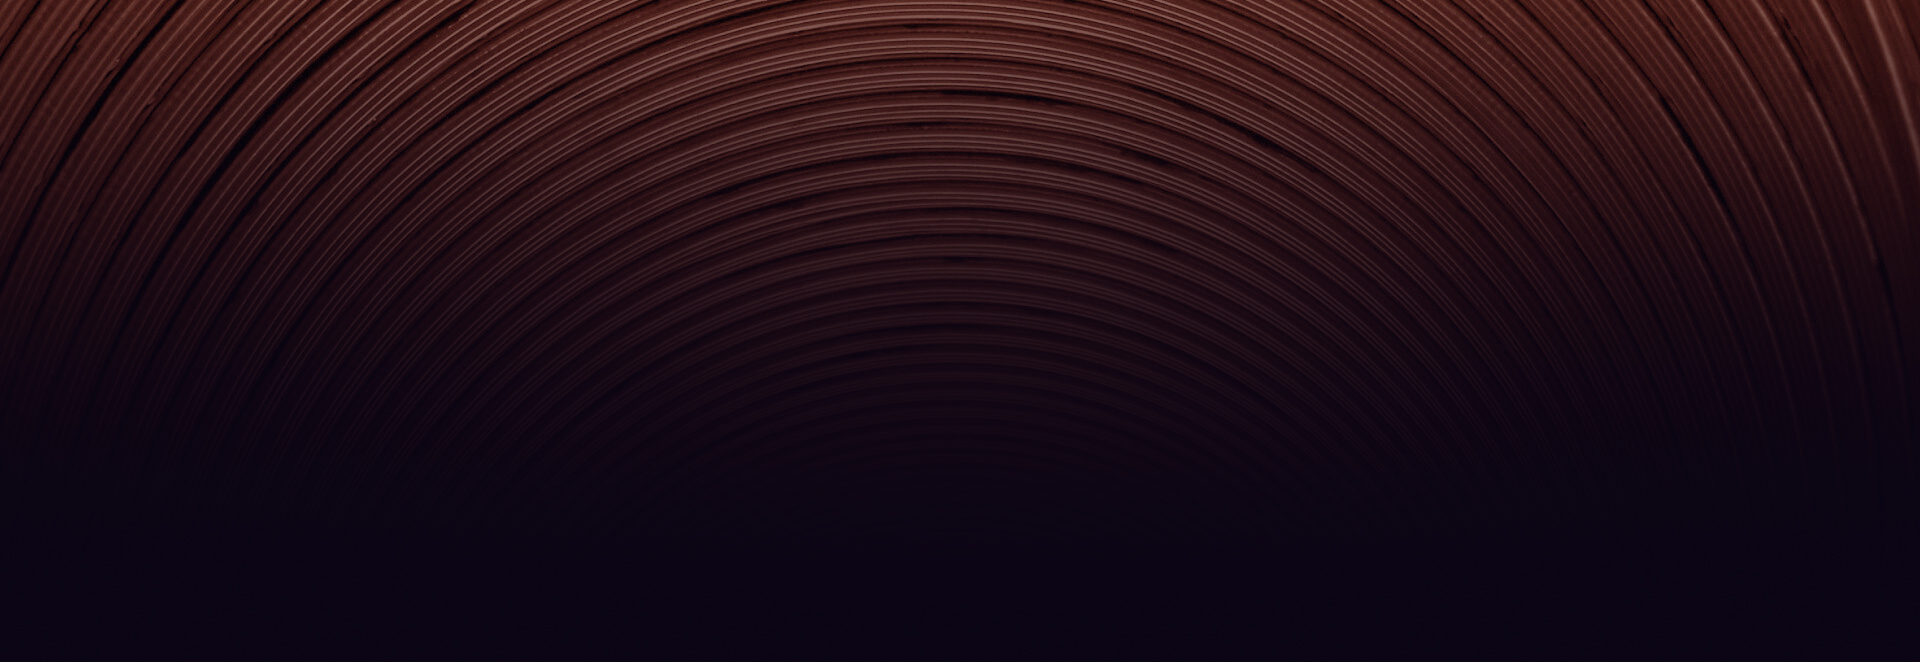 Dark red graphic with geometric concentric circles